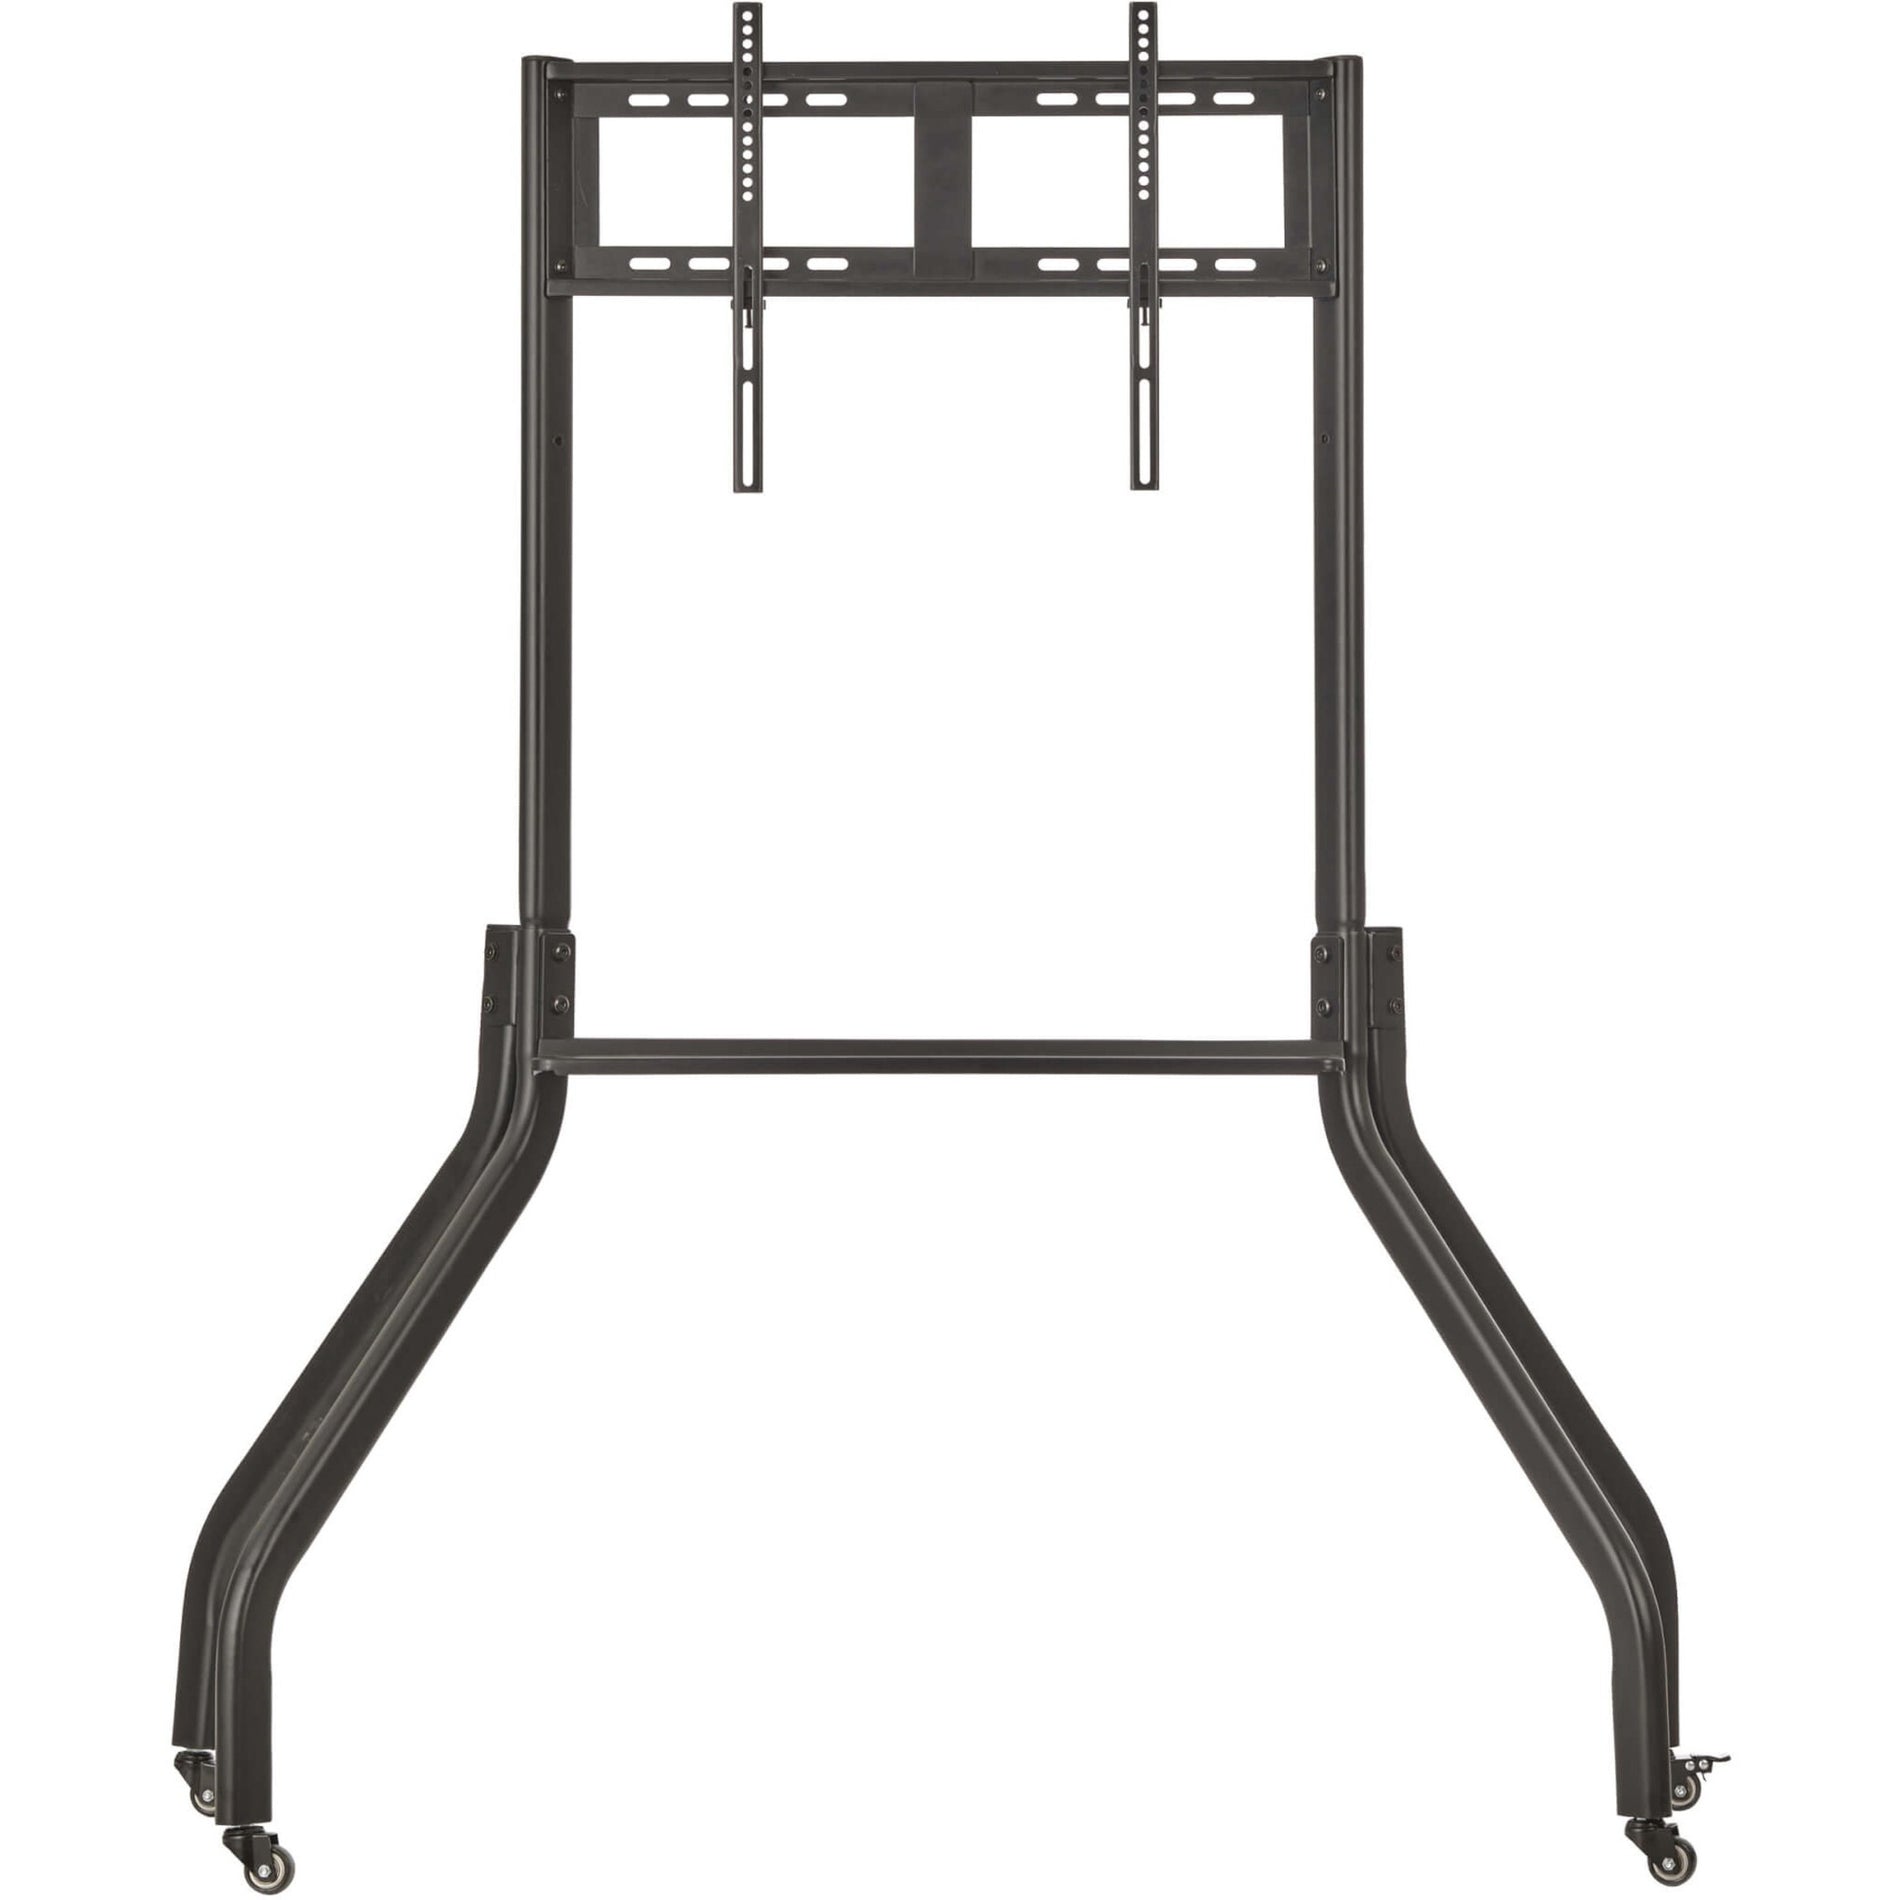 Rolling TV Cart for 42" to 65" Displays Wide Legs Locking Casters [Discontinued]